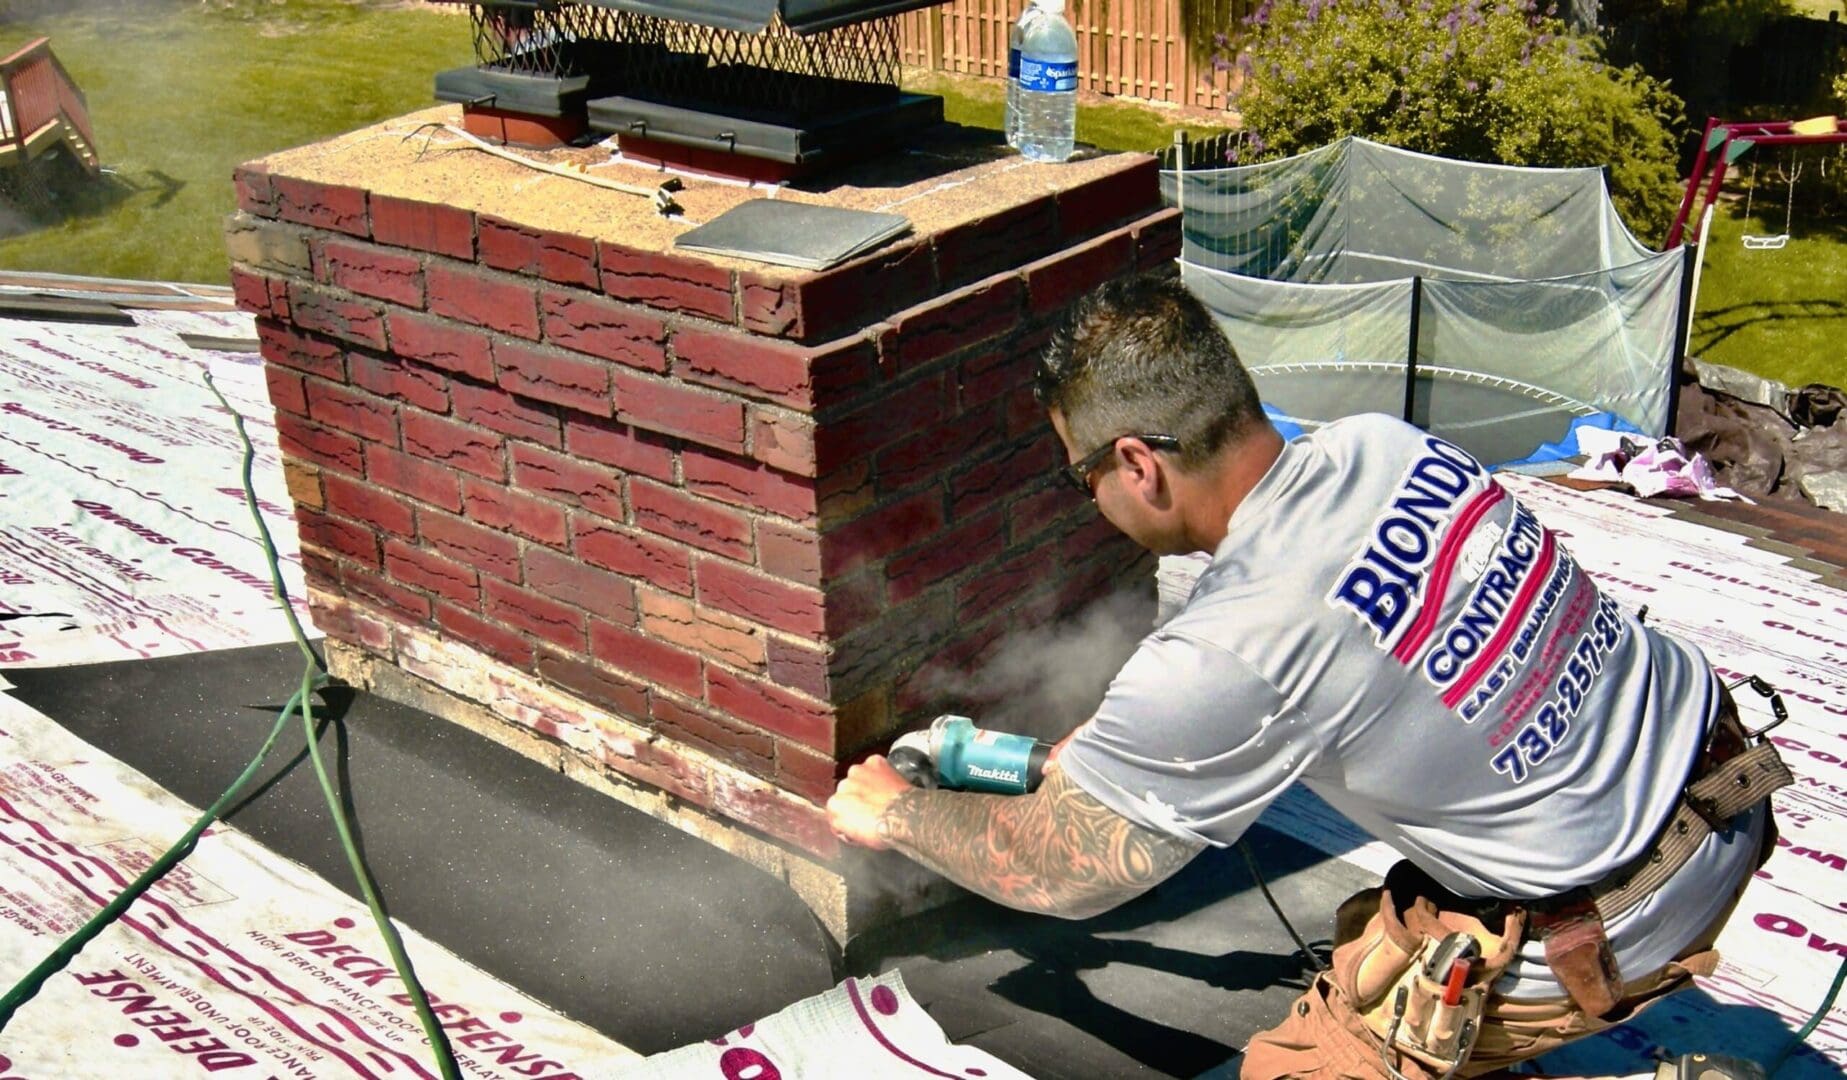 A man is painting the brick of a fireplace.